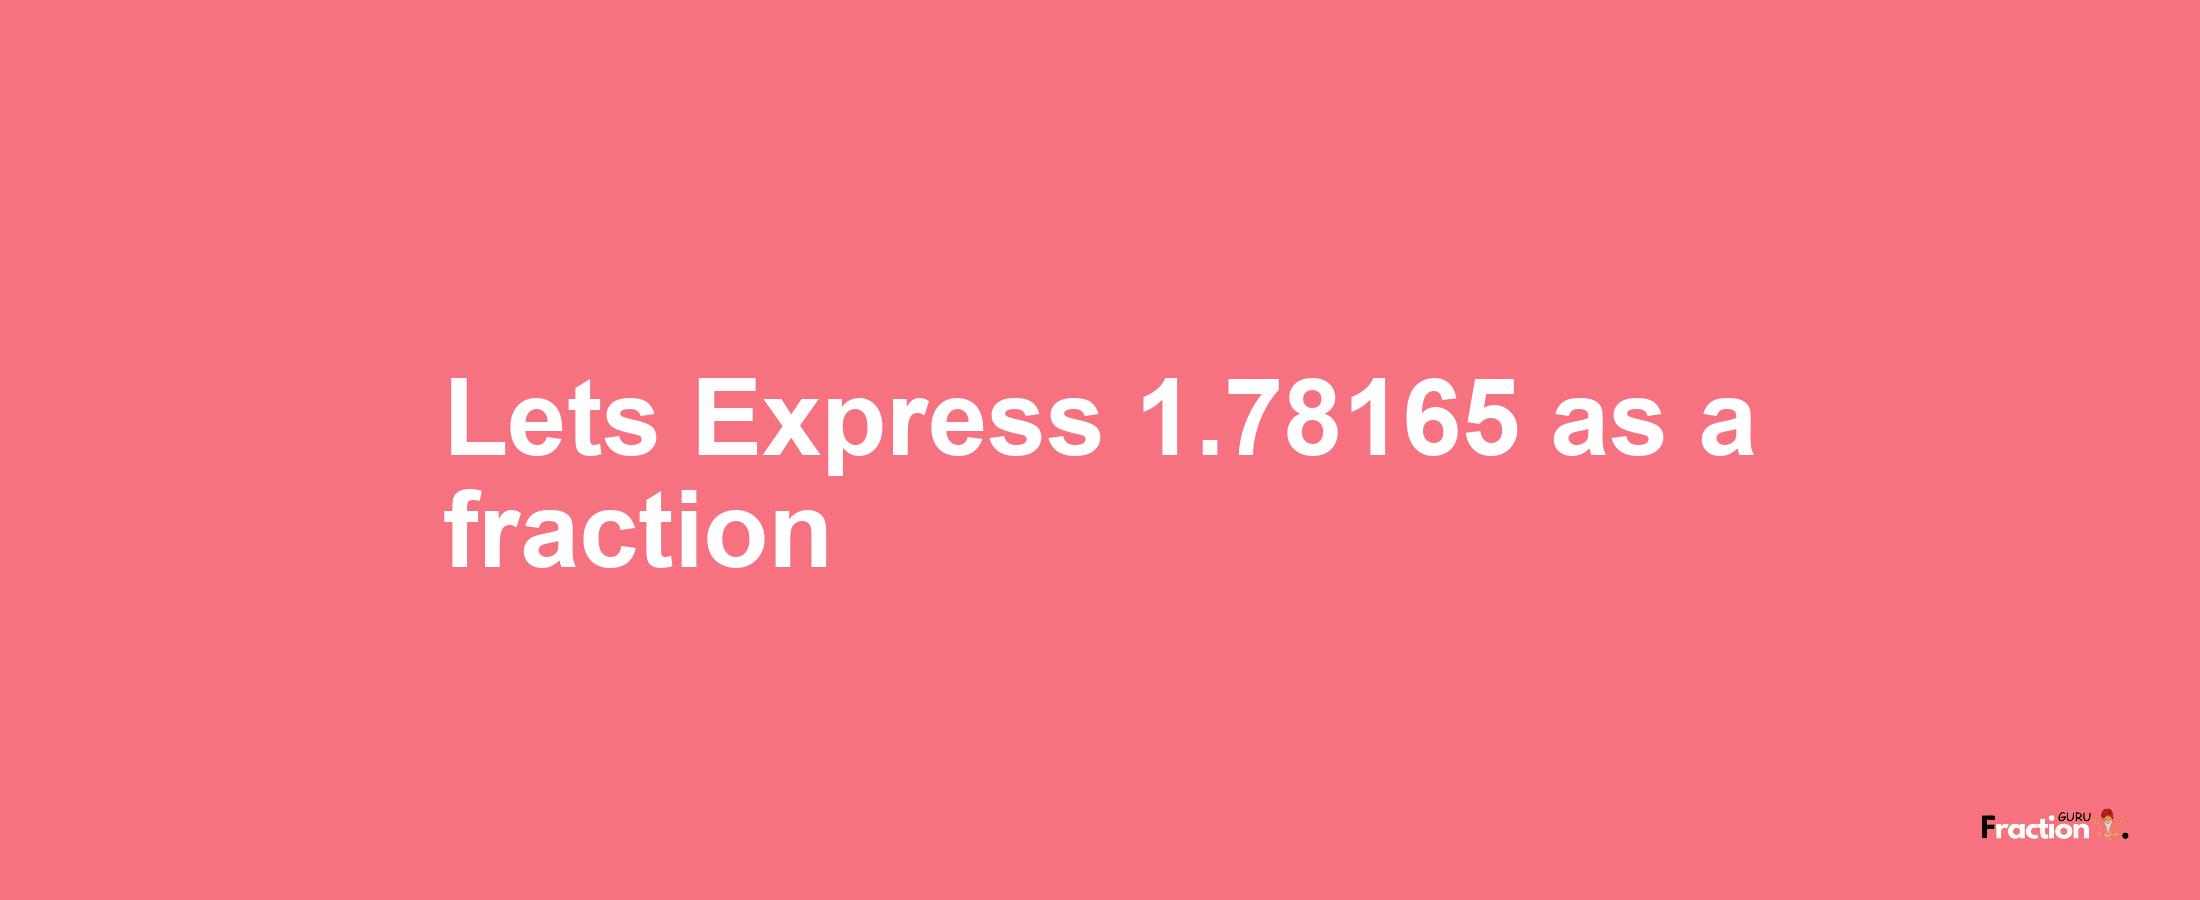 Lets Express 1.78165 as afraction